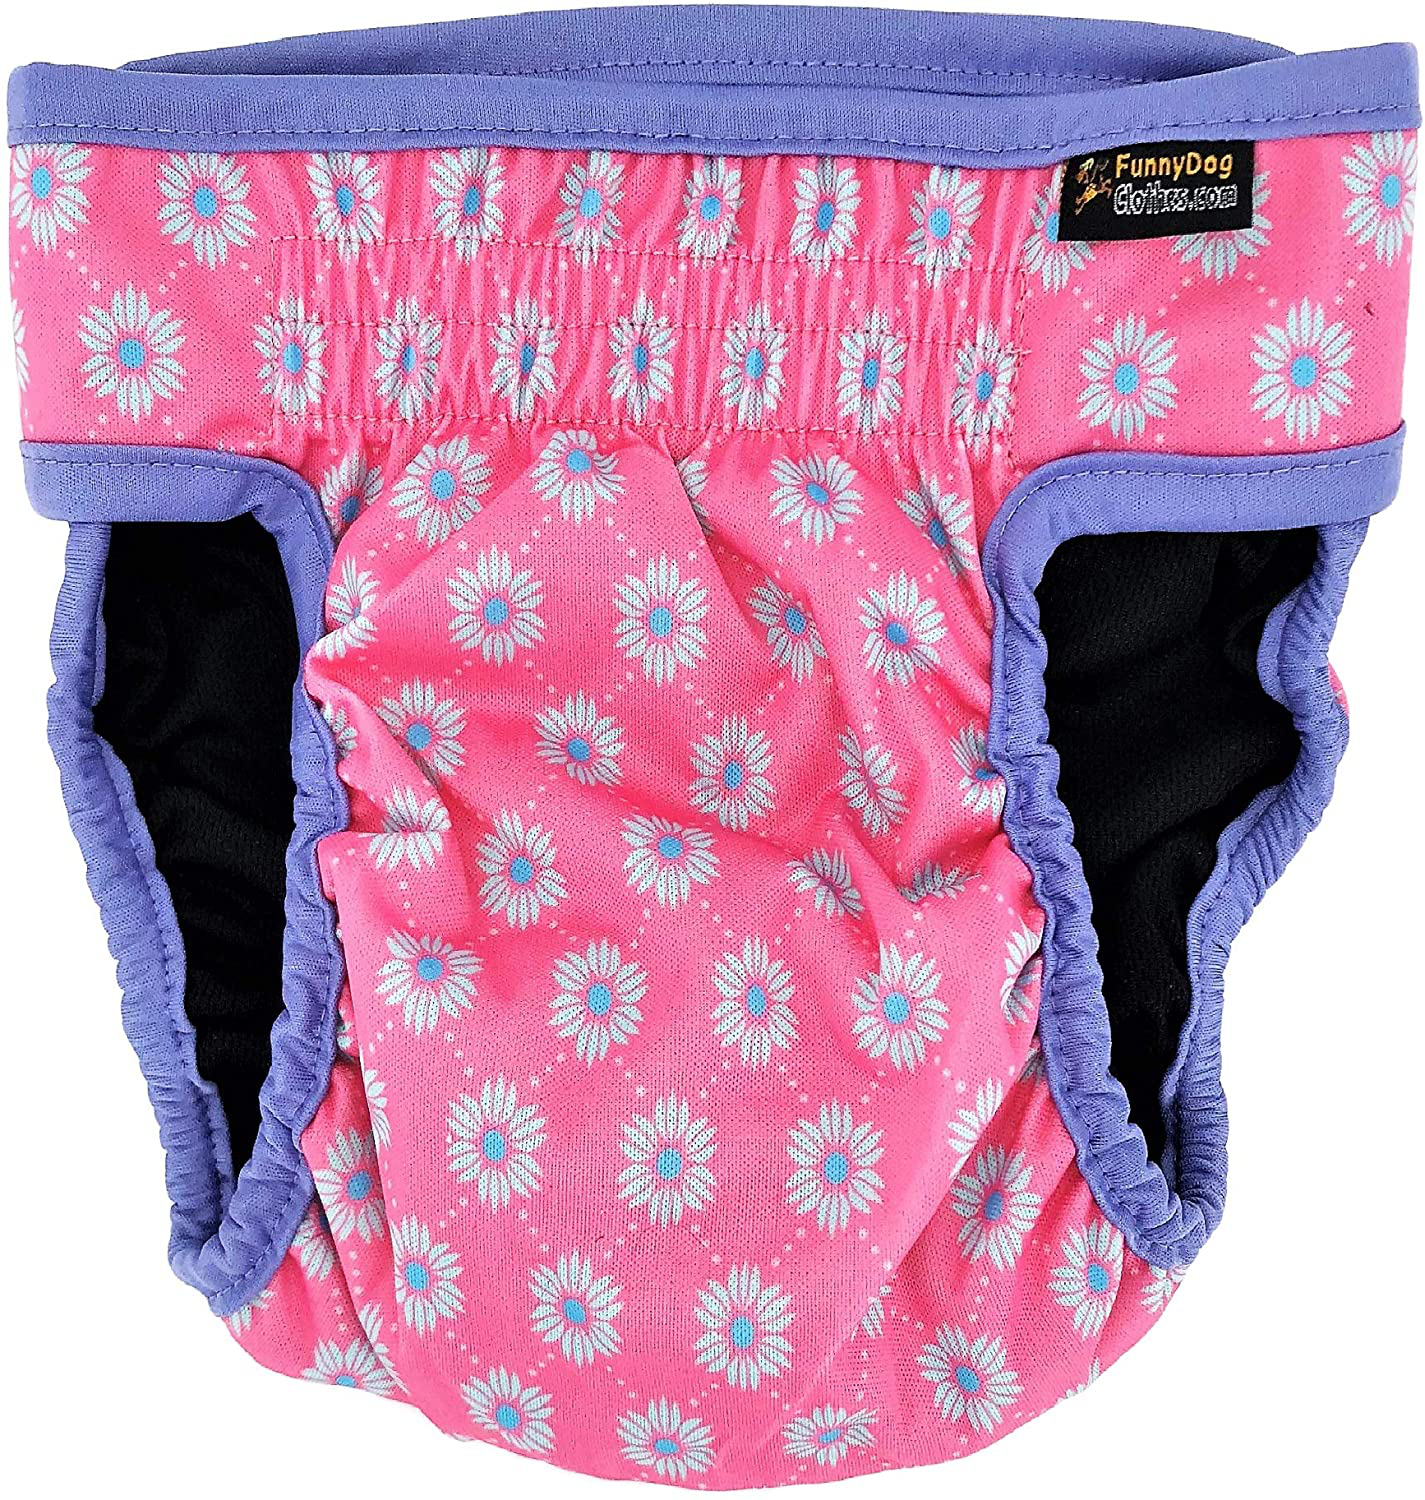 Pack of 3 or 6 Female Dog Diapers with 4 - Layers of Absorbent Pads Cat Panties Waterproof Leak Proof Washable